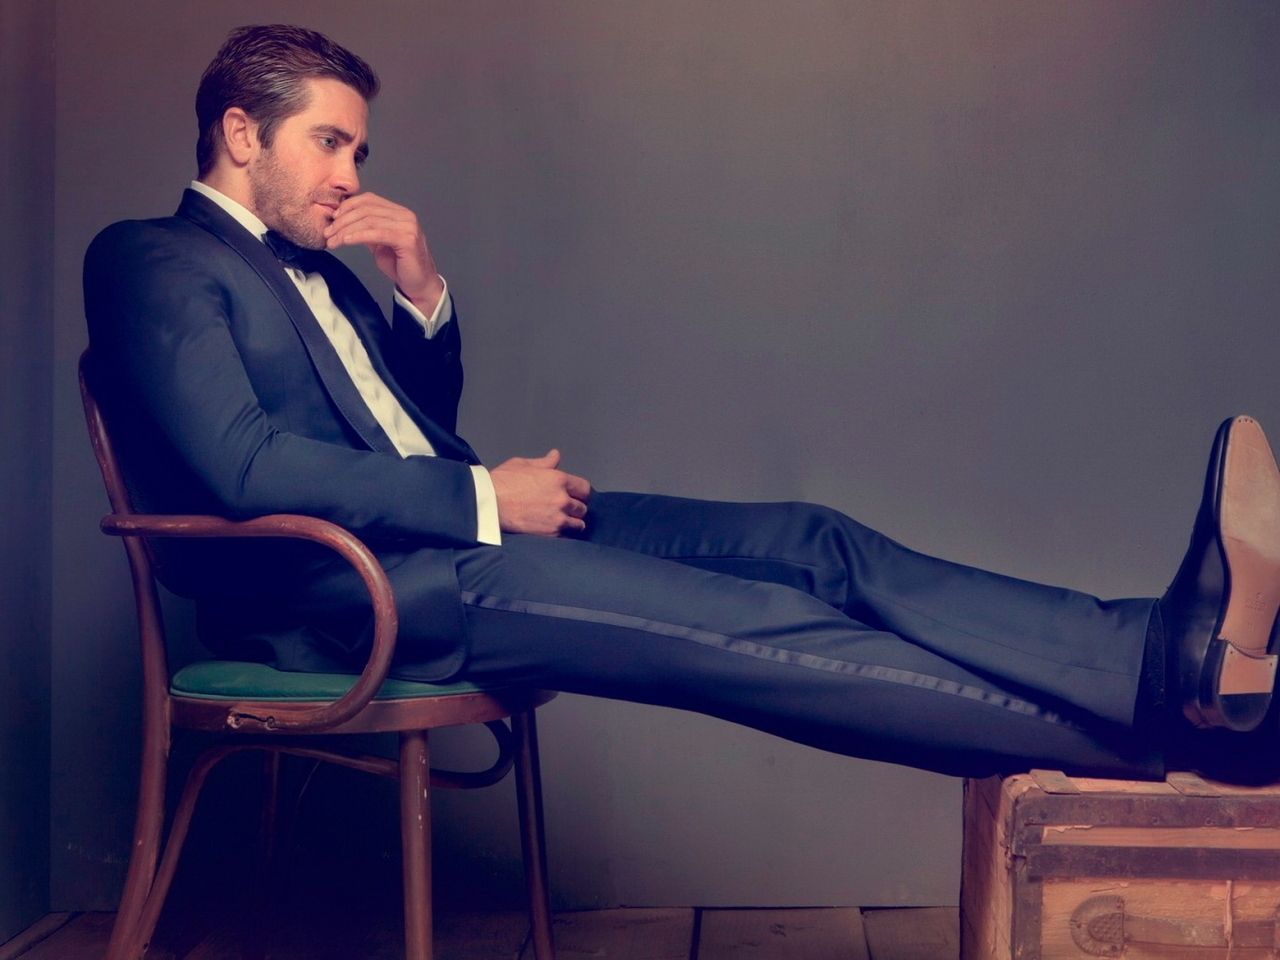 Jake Gyllenhaal Thoughtful for 1280 x 960 resolution